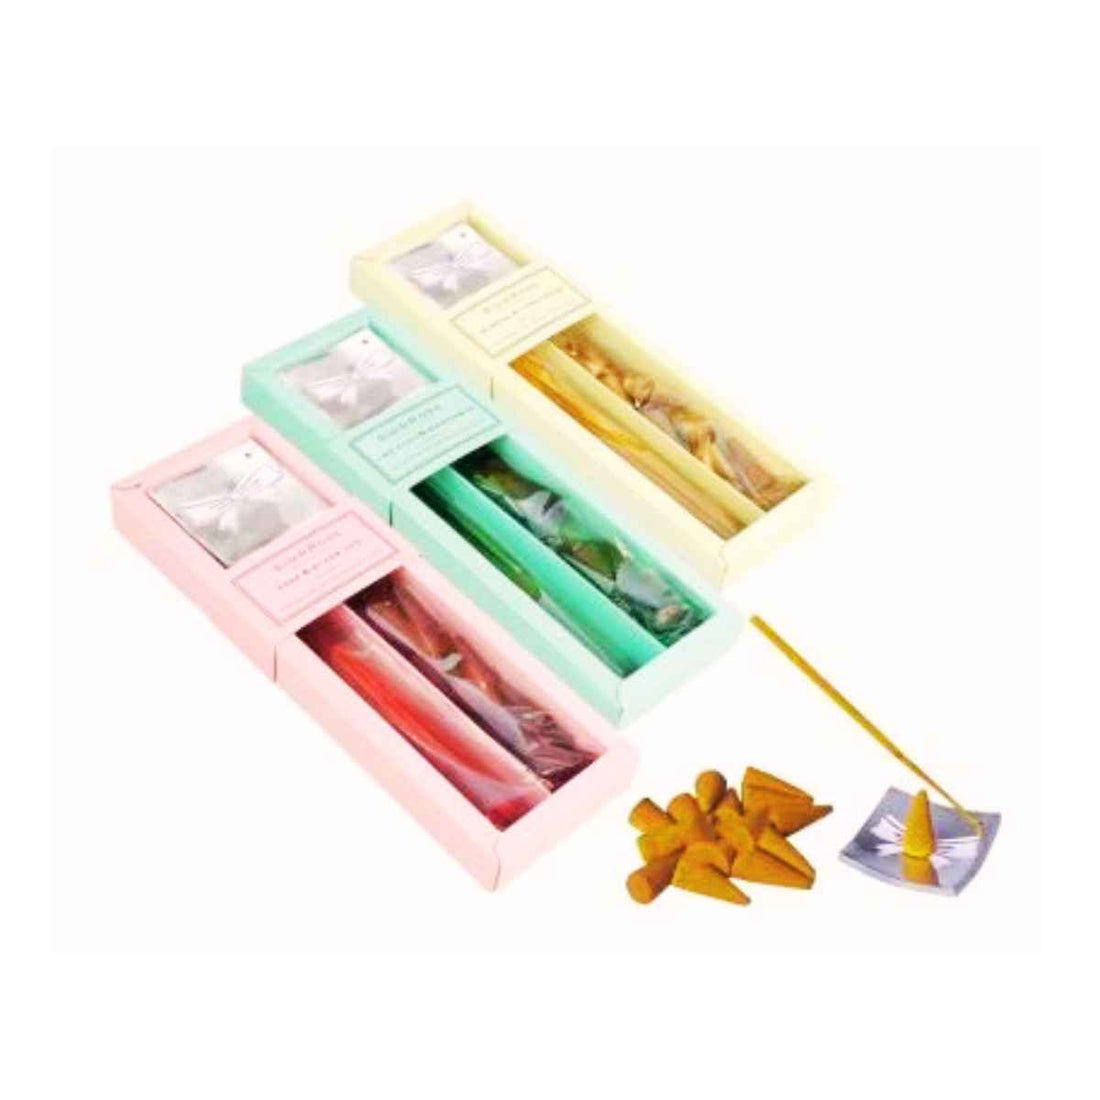 Sim And Ross Fragrance Incense Gift Set